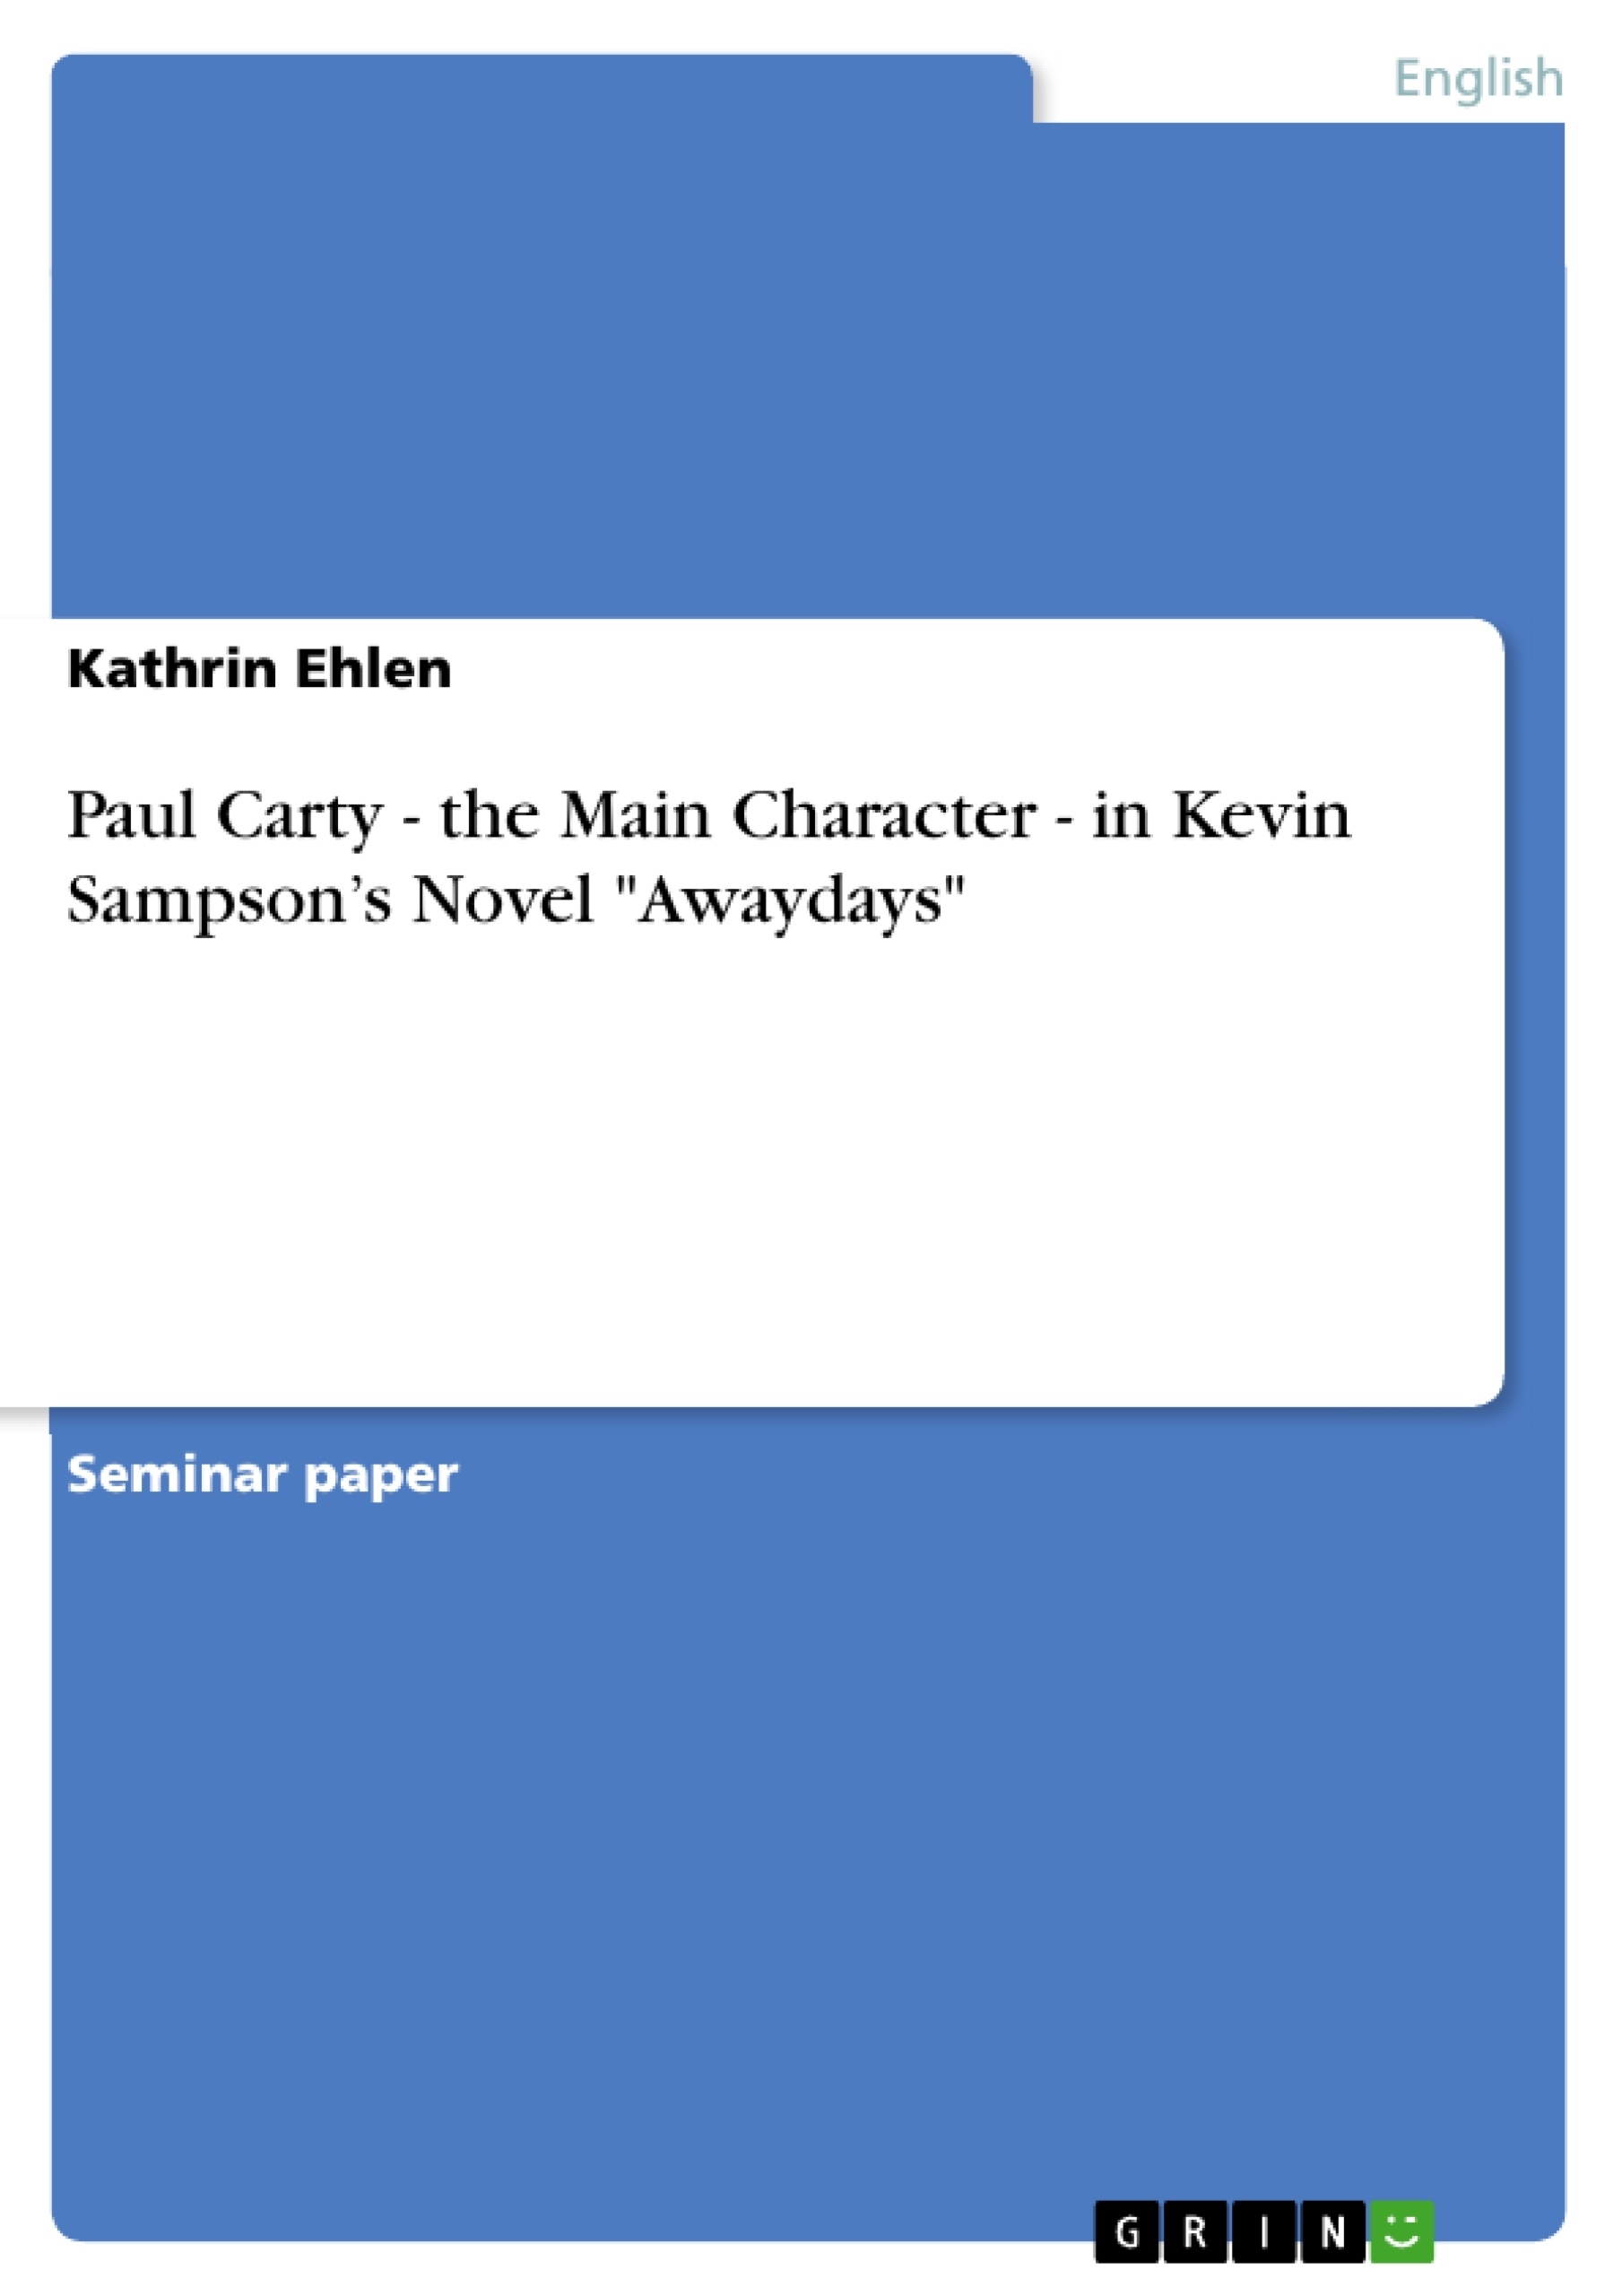 Title: Paul Carty - the Main Character - in Kevin Sampson’s Novel "Awaydays"